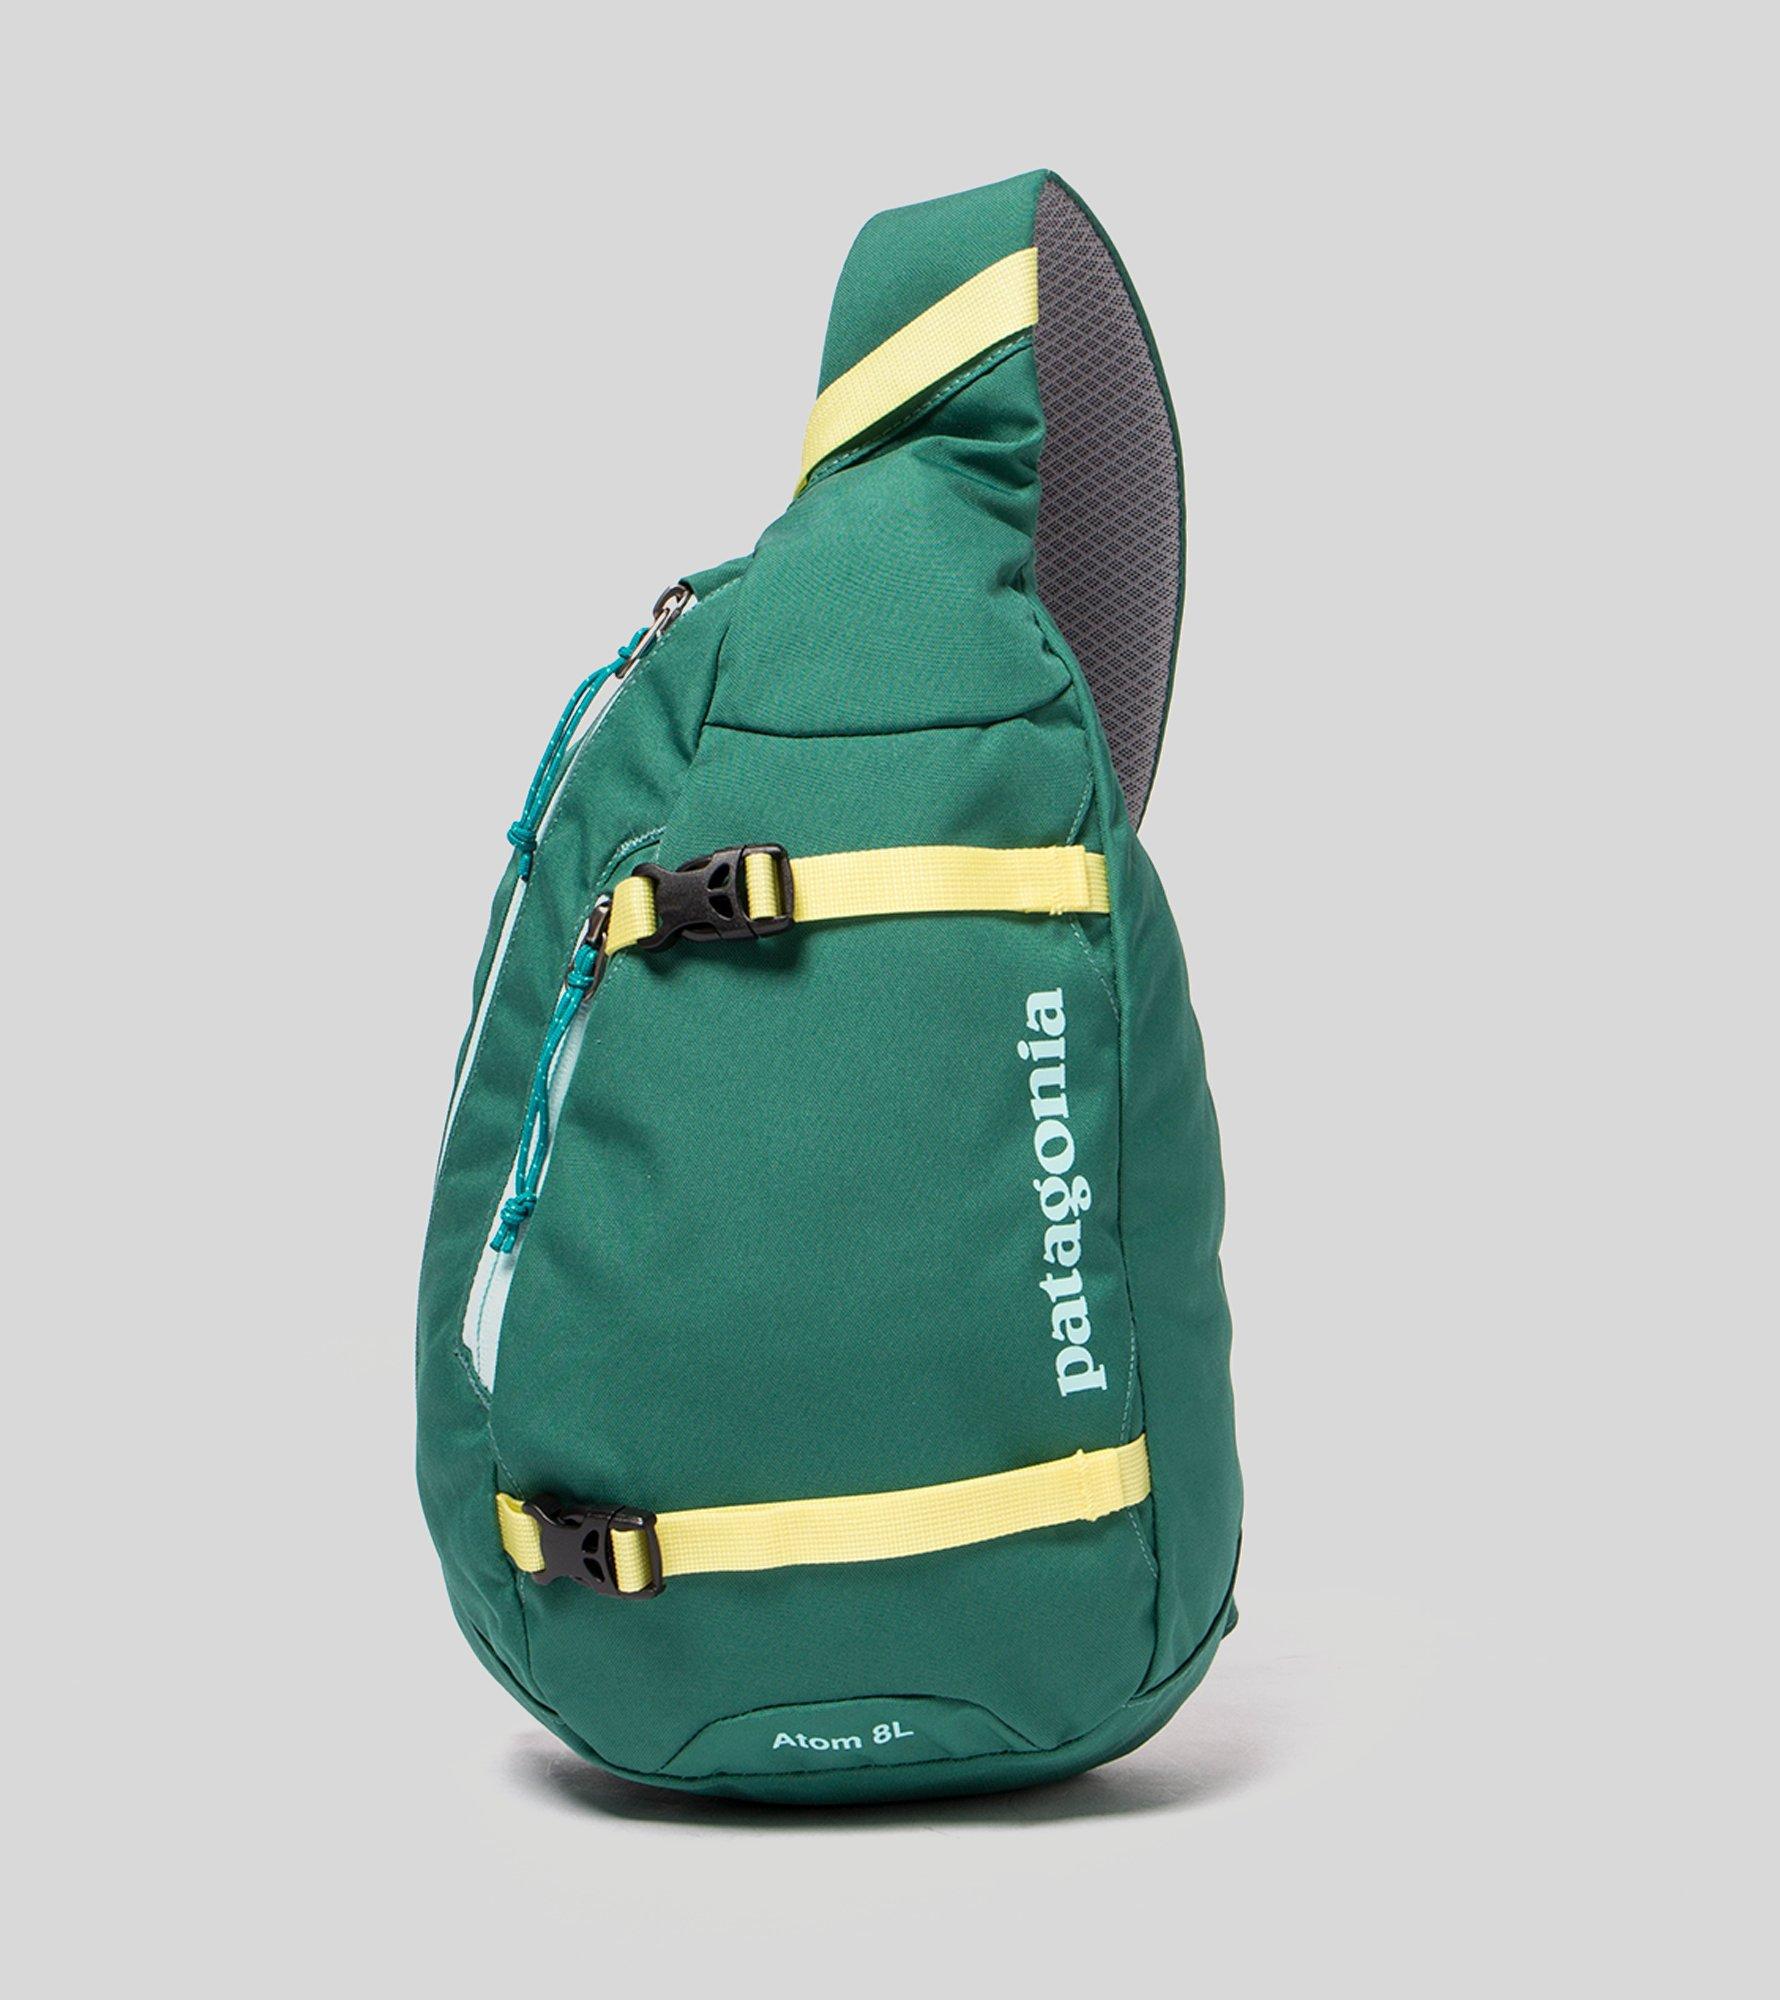 Patagonia Synthetic Atom Sling Bag in Green for Men - Lyst